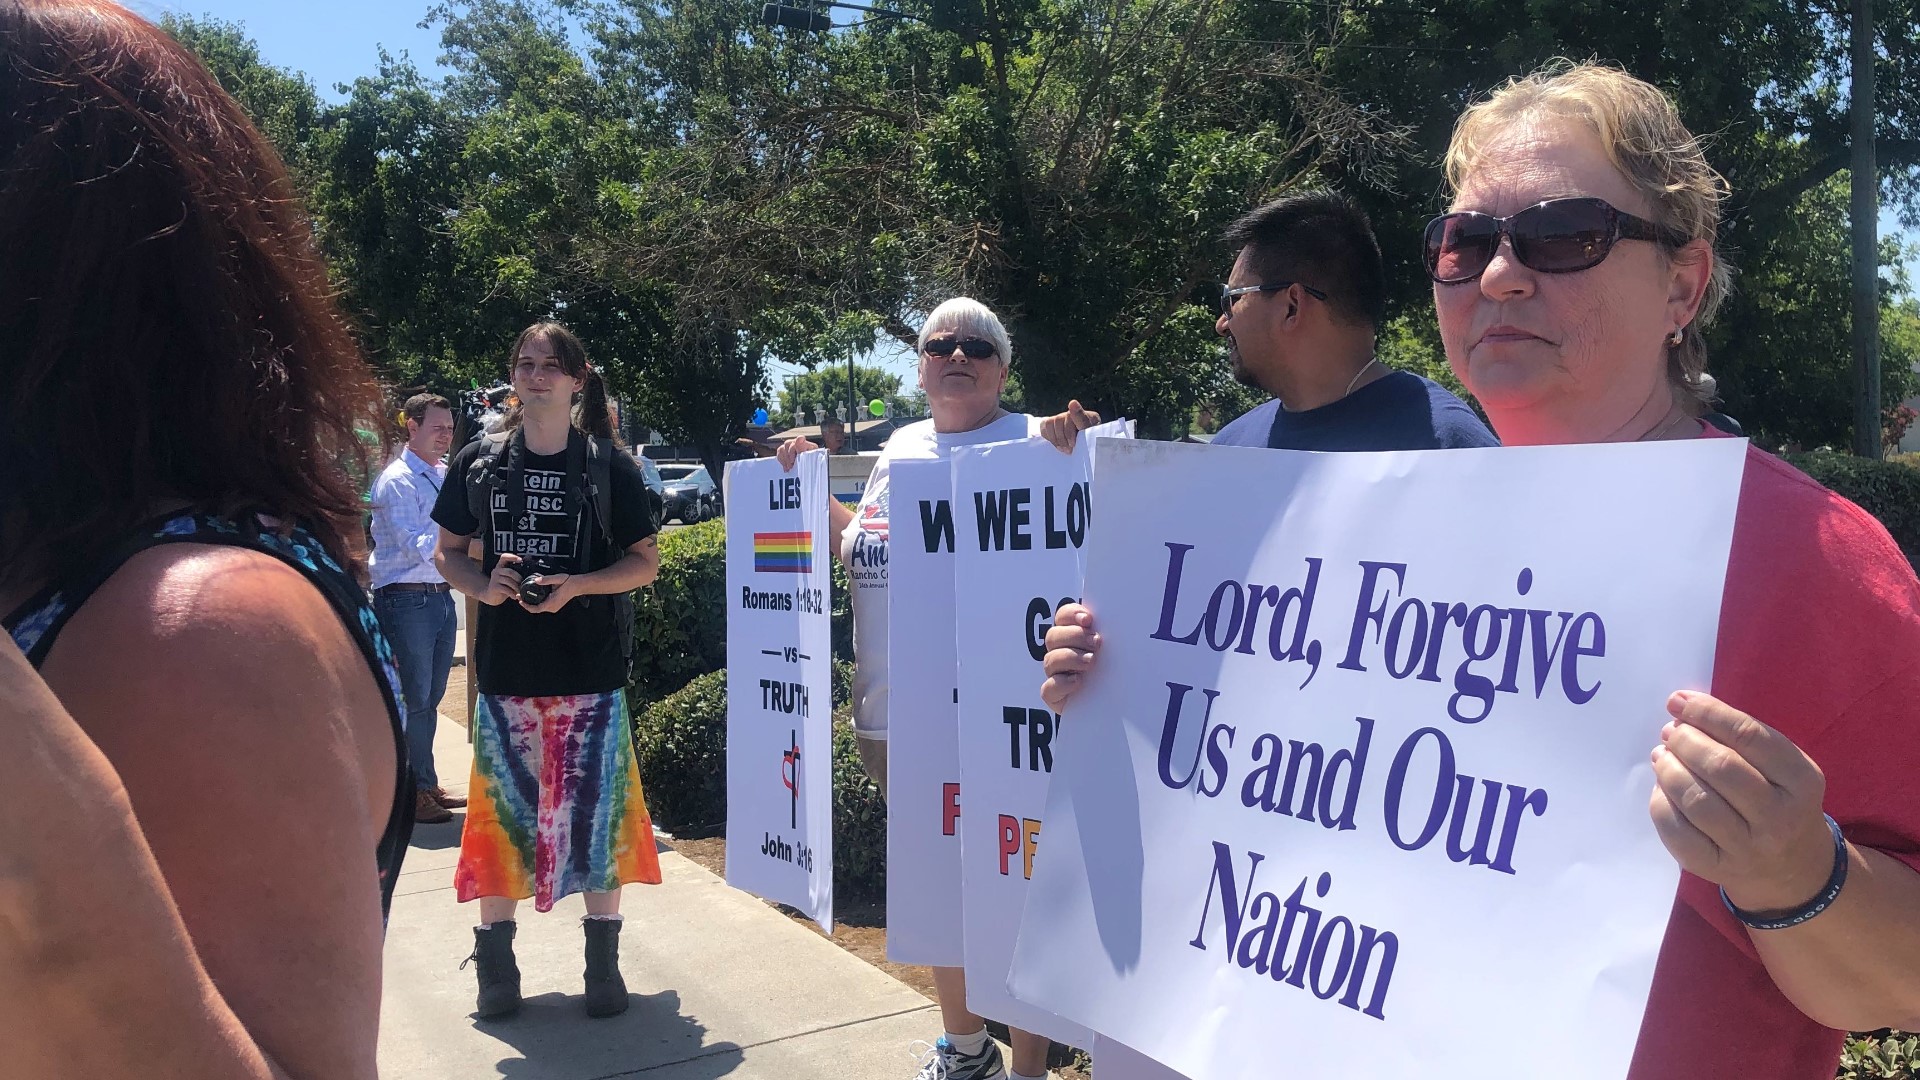 The National Straight Pride Coalition announced its second annual "Straight Pride Event" for Modesto at the end of August 2020.